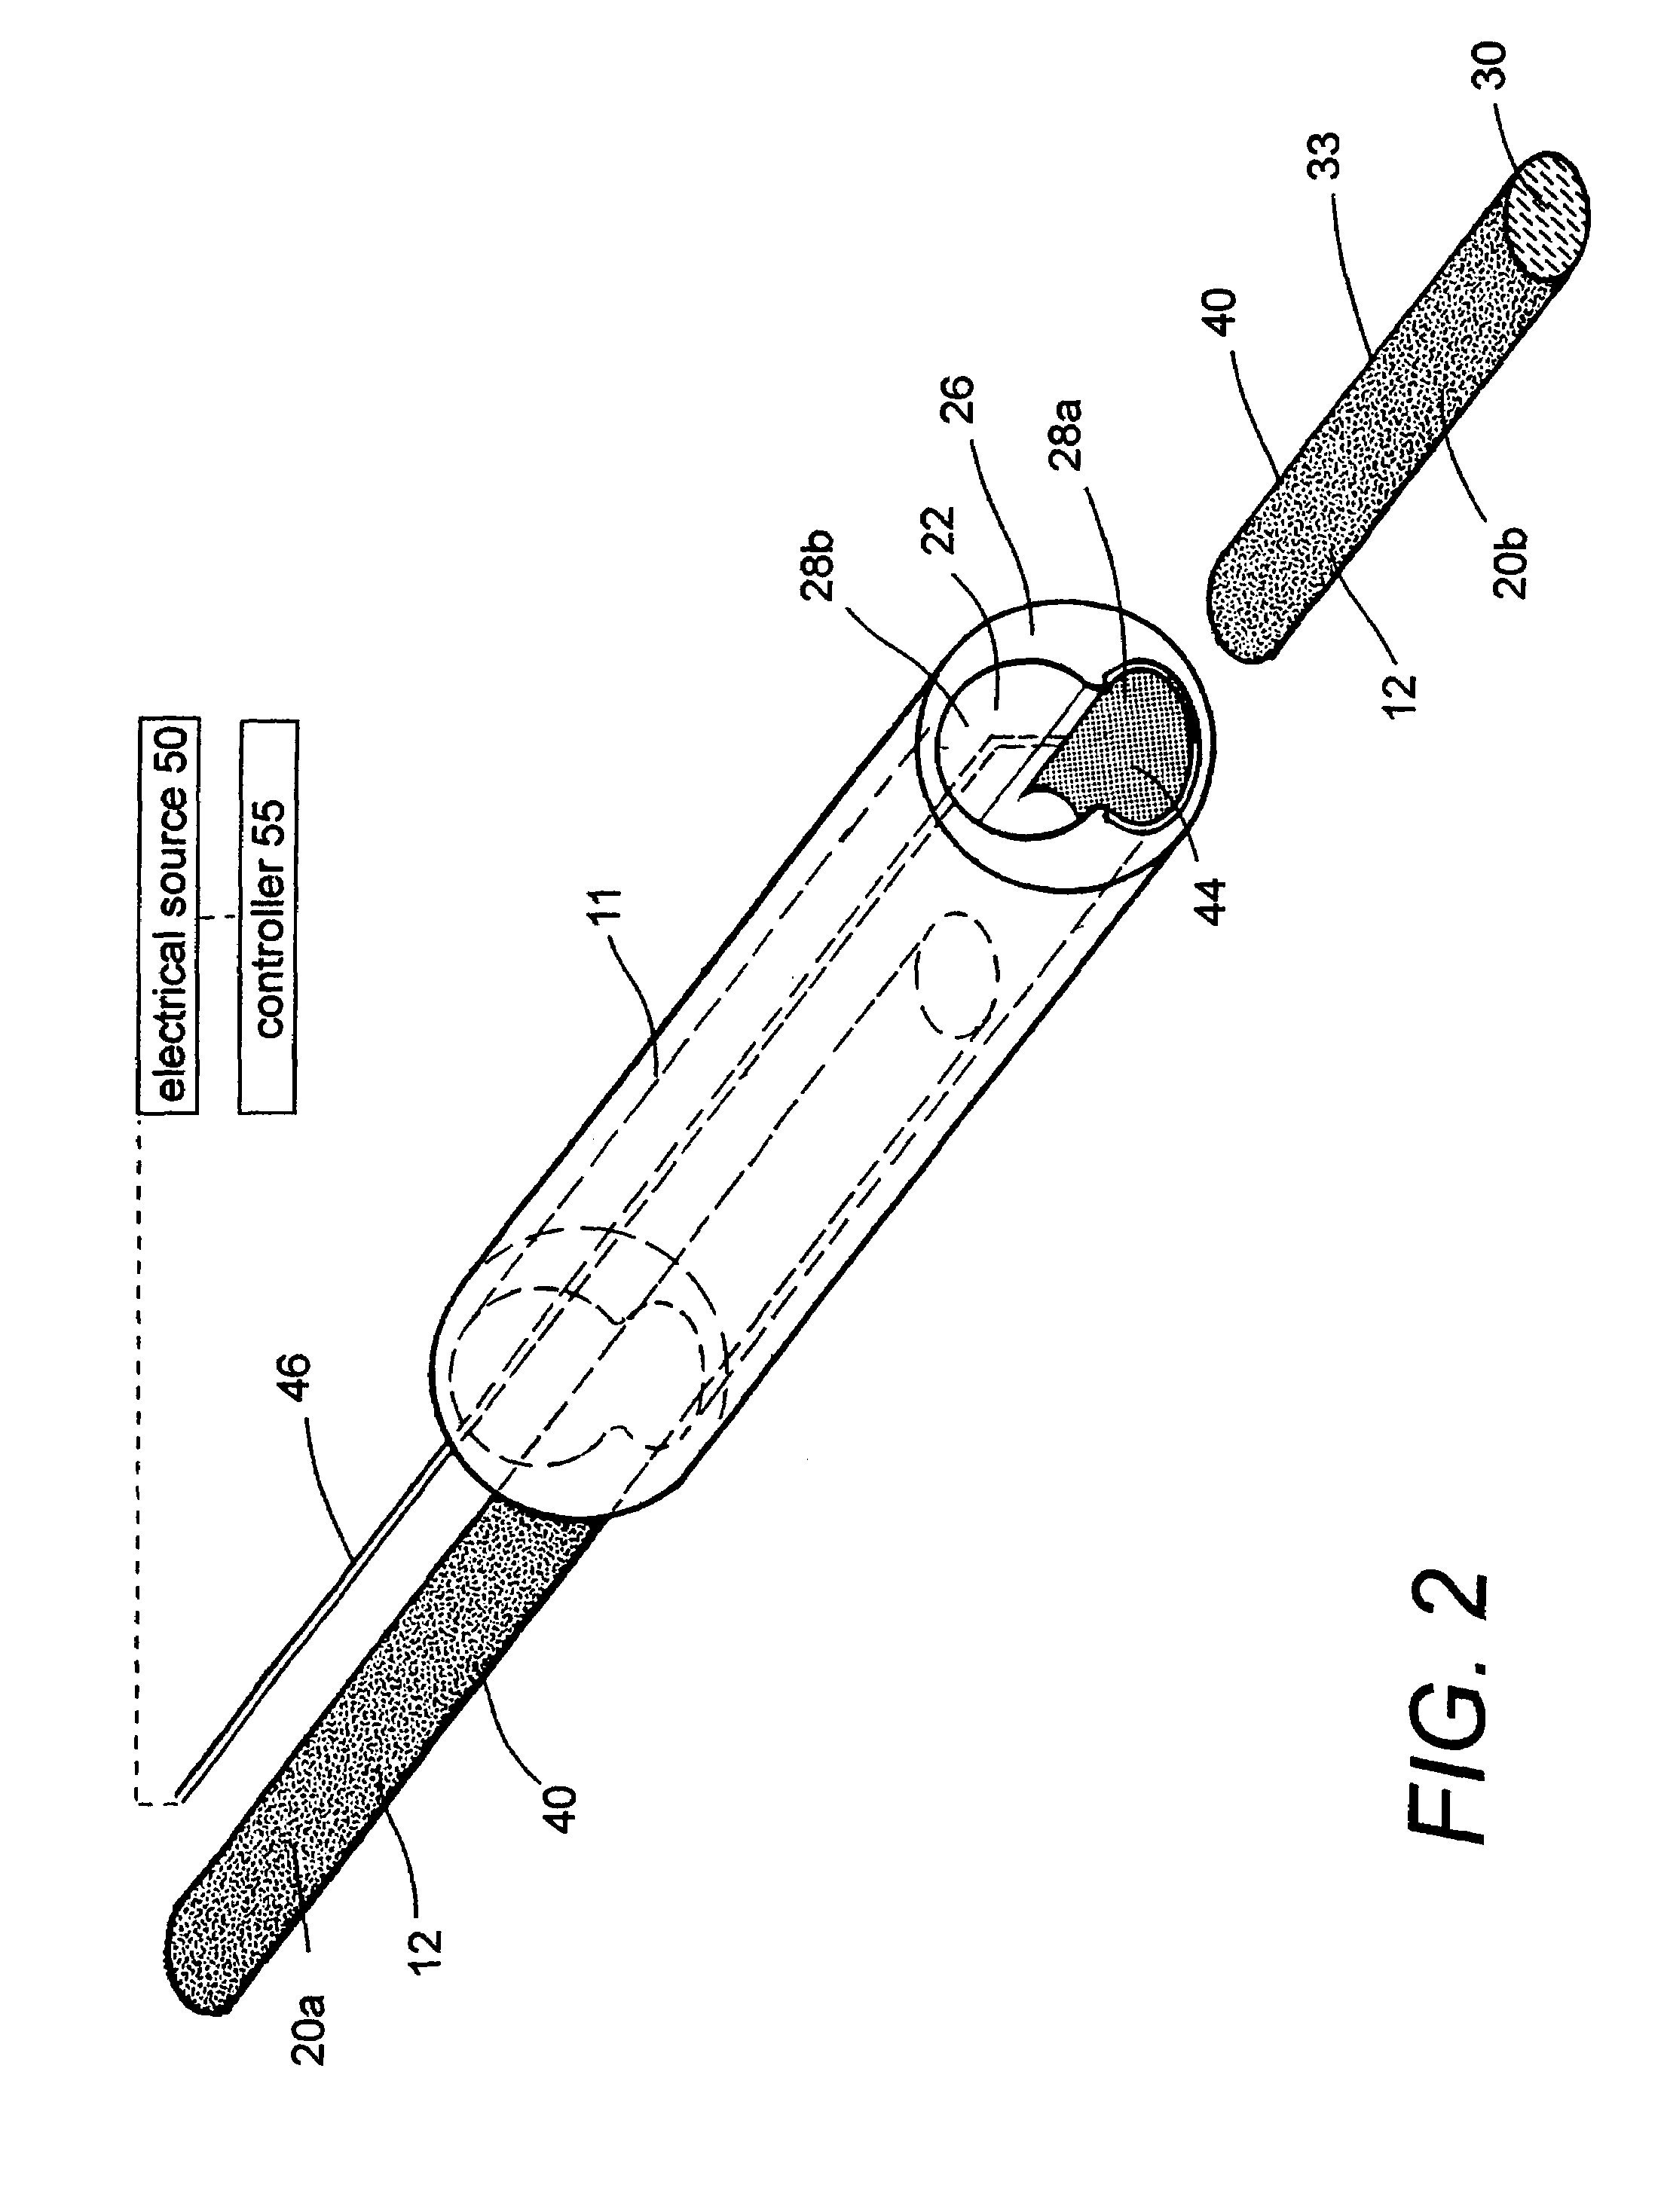 Polymer composites for biomedical applications and methods of making